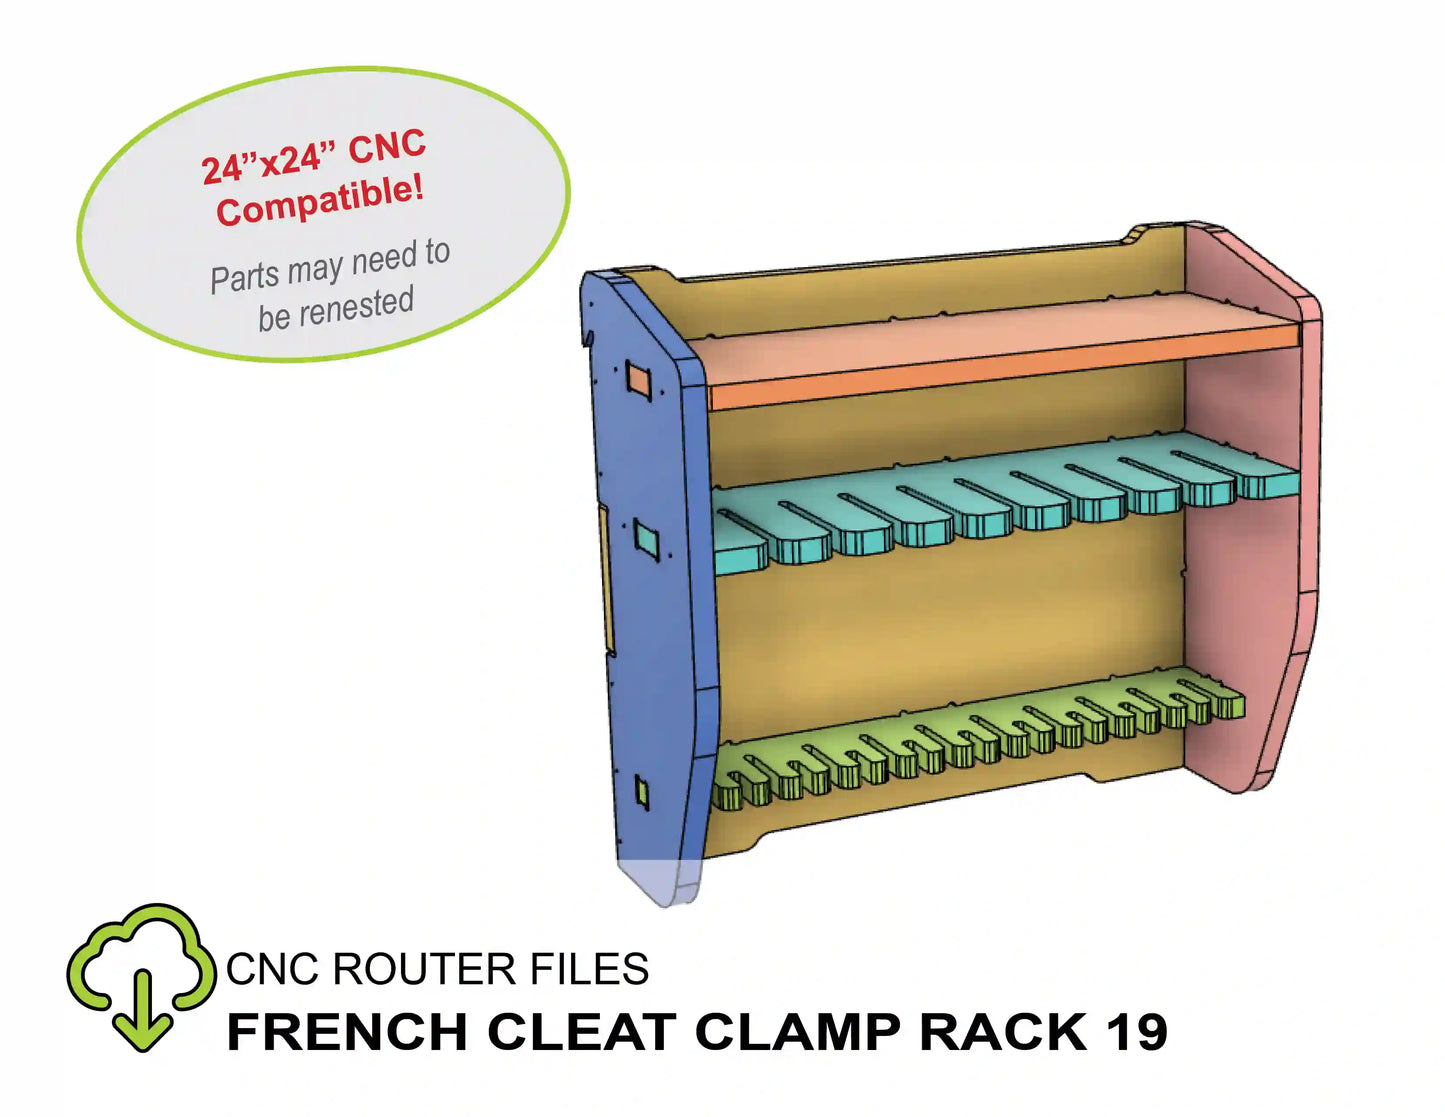 CNC Router Files French Cleat Trigger Clamp Storage Rack Cabinet  24x24